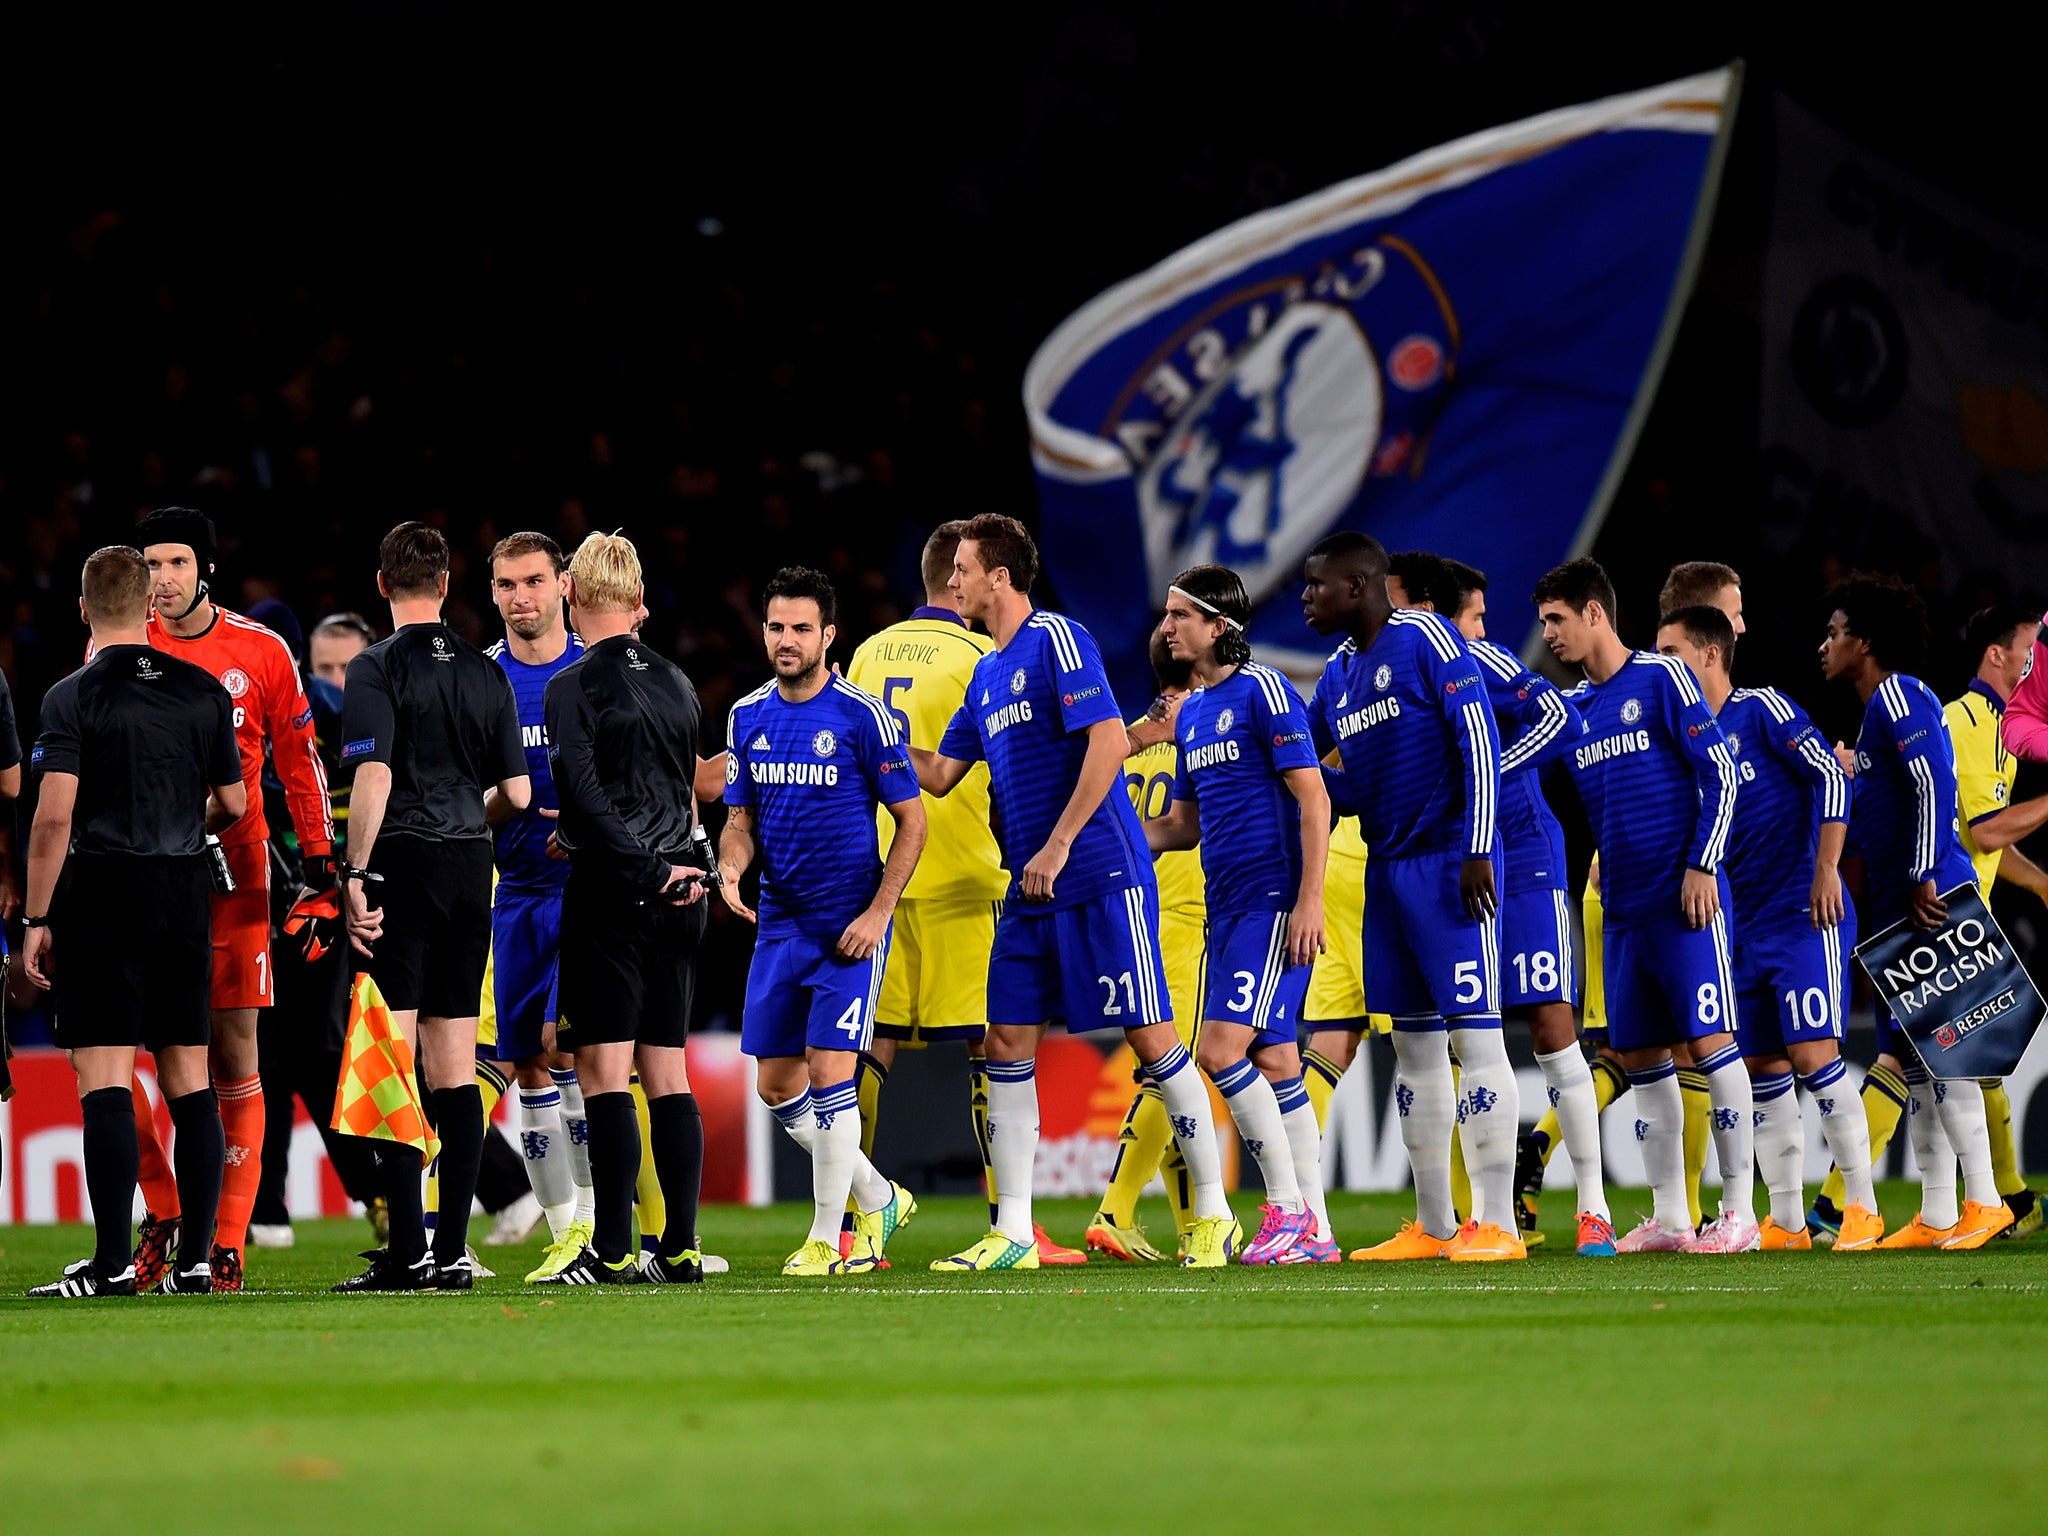 The opposing teams shake hands prior to kickoff during the UEFA Champions League Group G match between Chelsea FC and NK Maribor